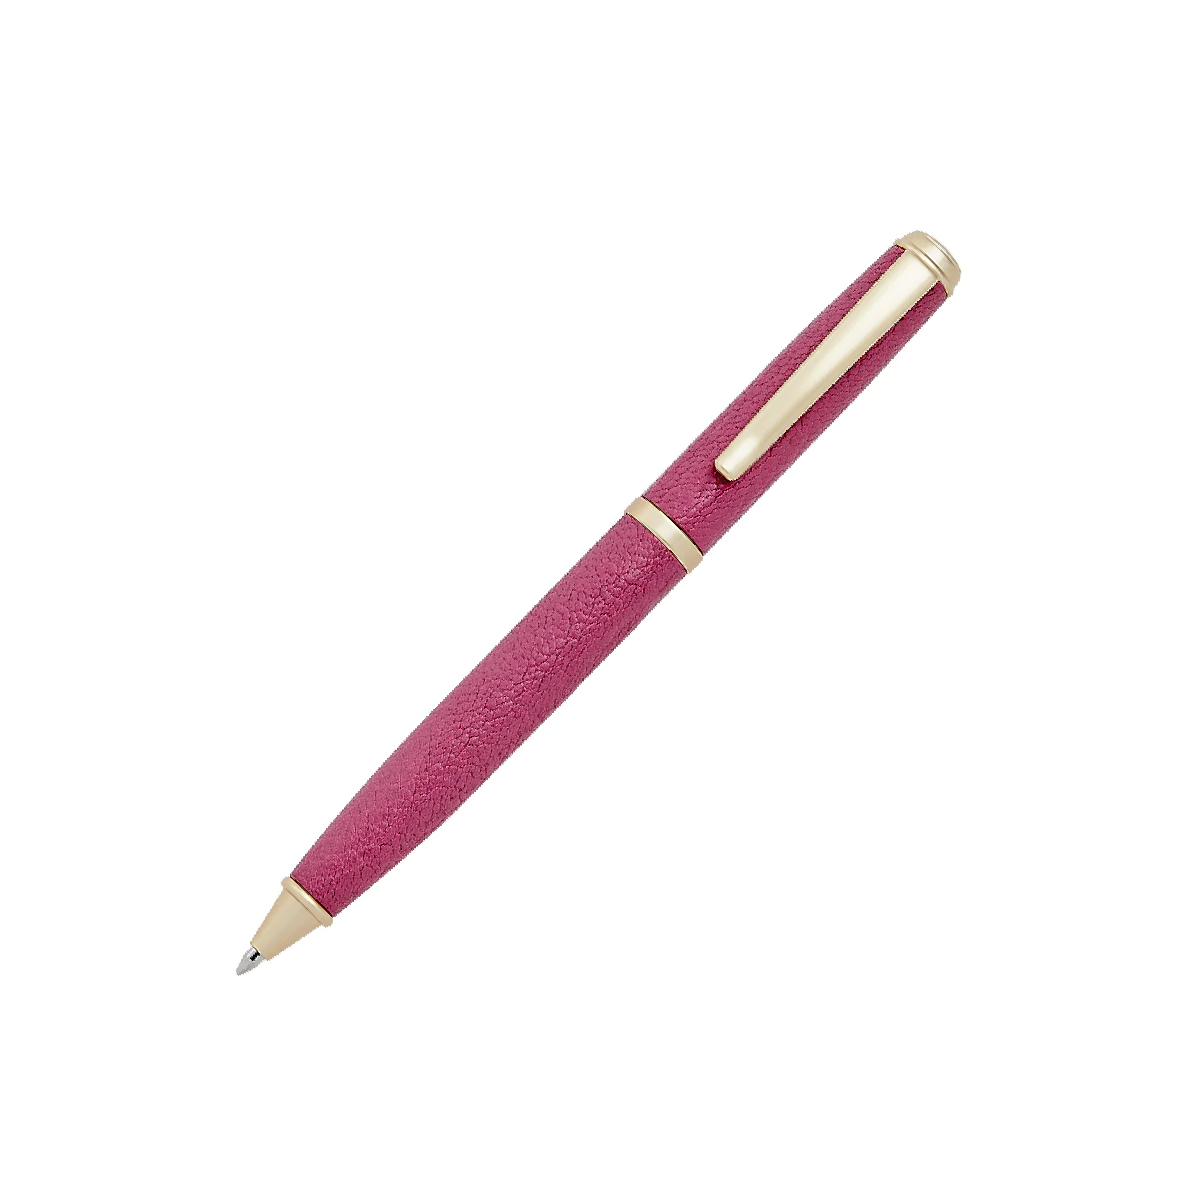 Graphic Image - Pink Pebble Goatskin Leather Wrapped Pen